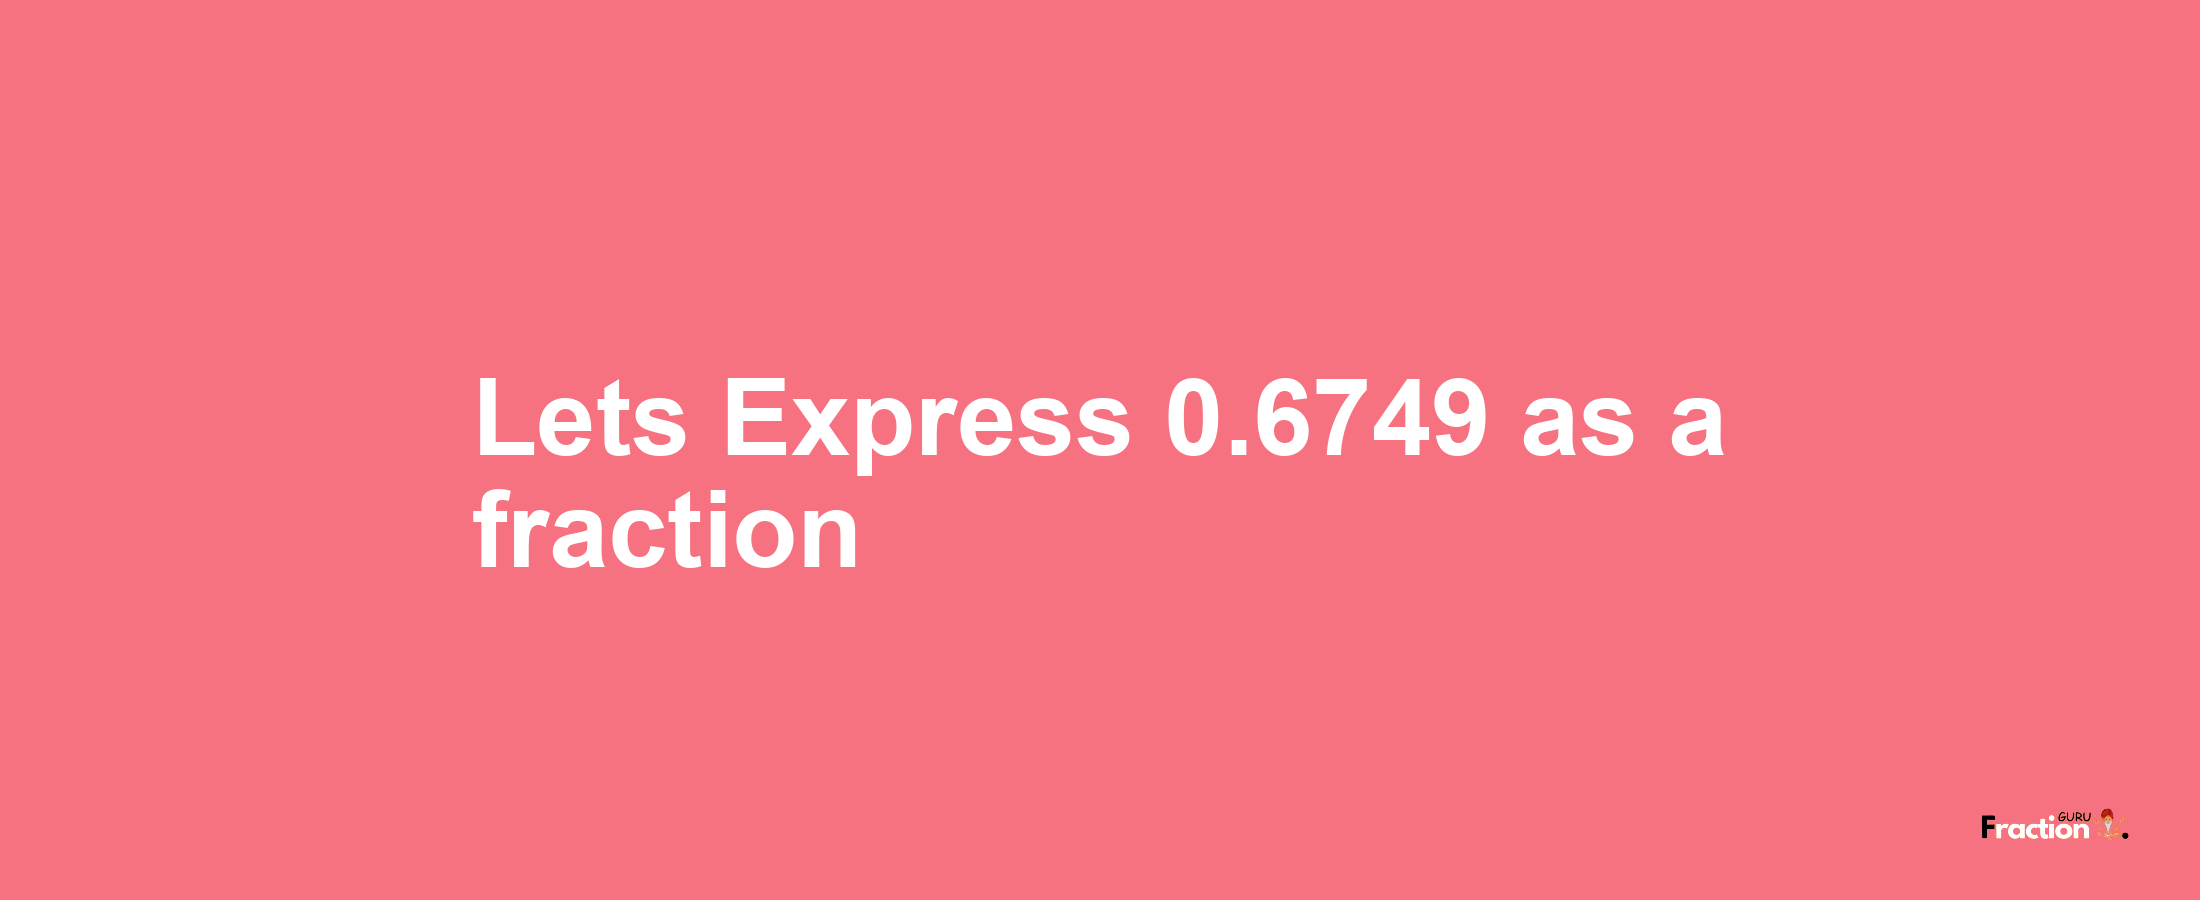 Lets Express 0.6749 as afraction